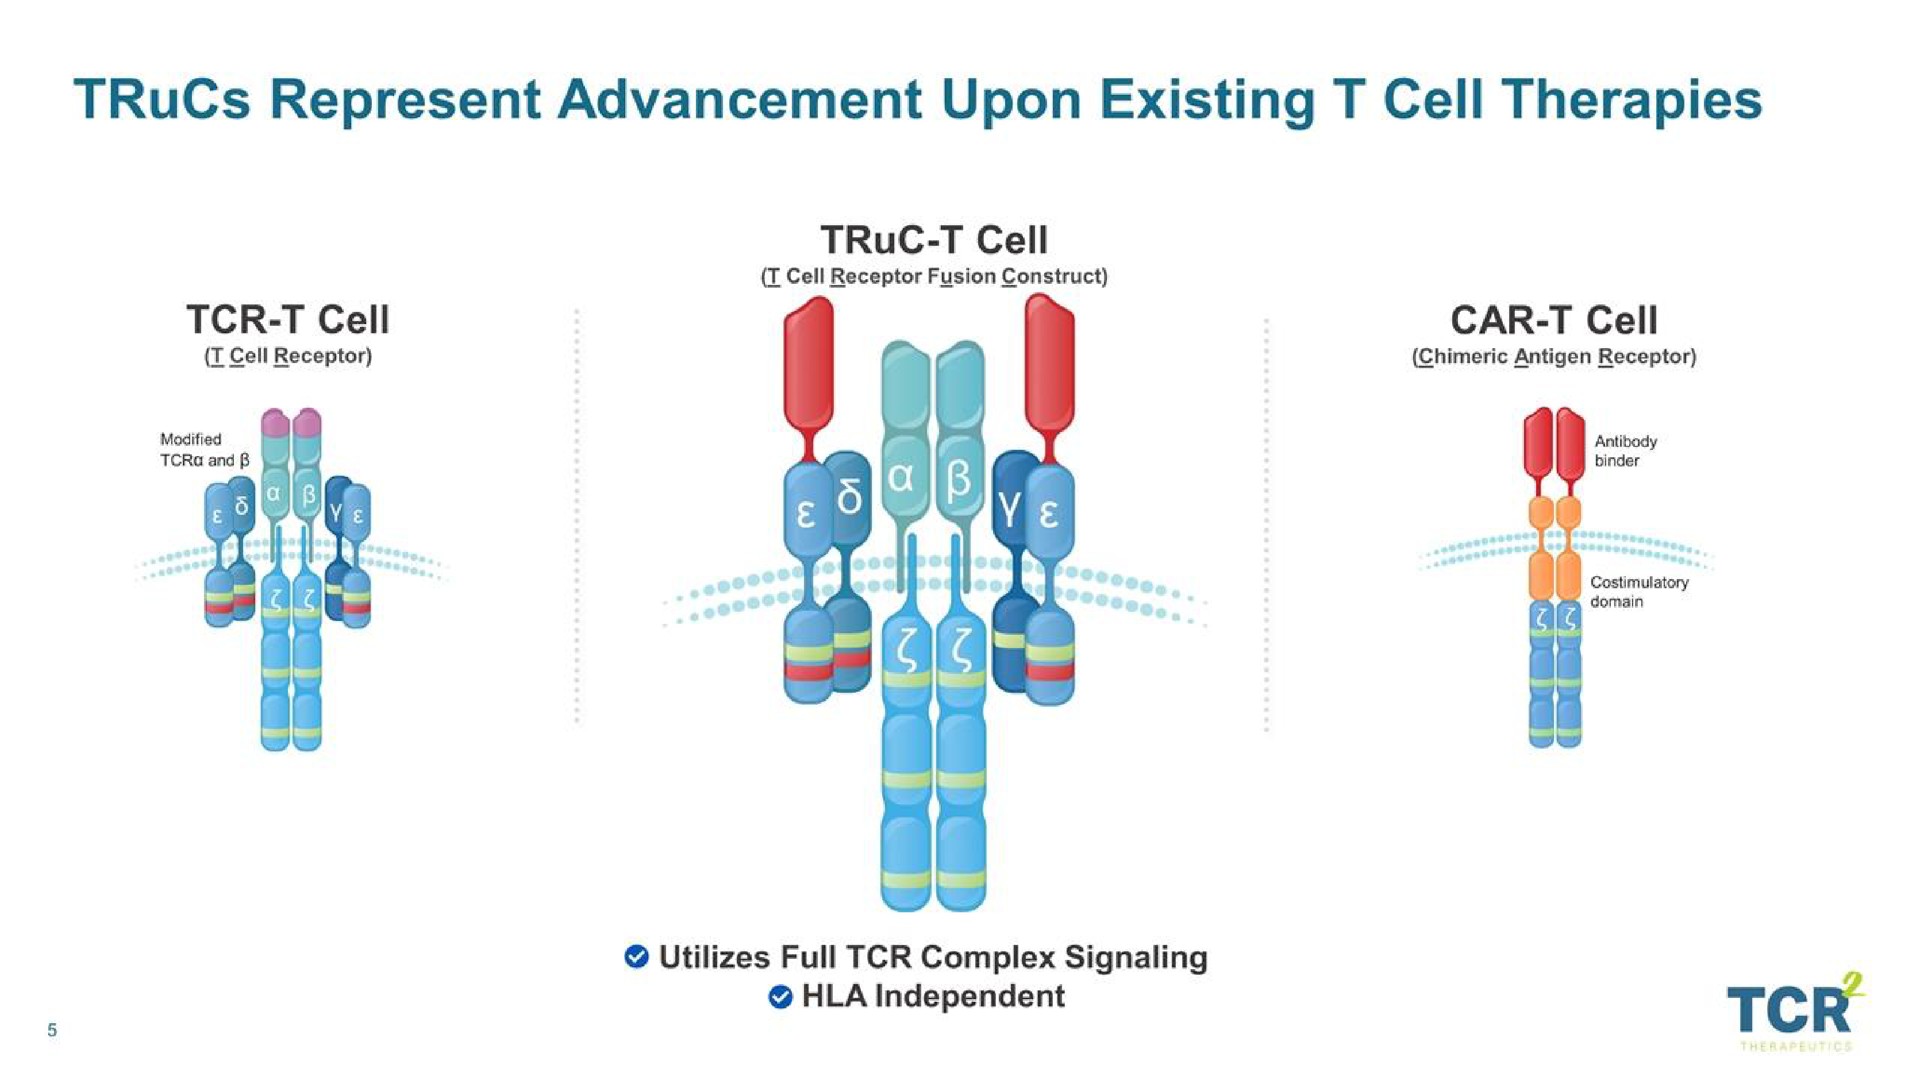 represent advancement upon existing cell therapies | TCR2 Therapeutics